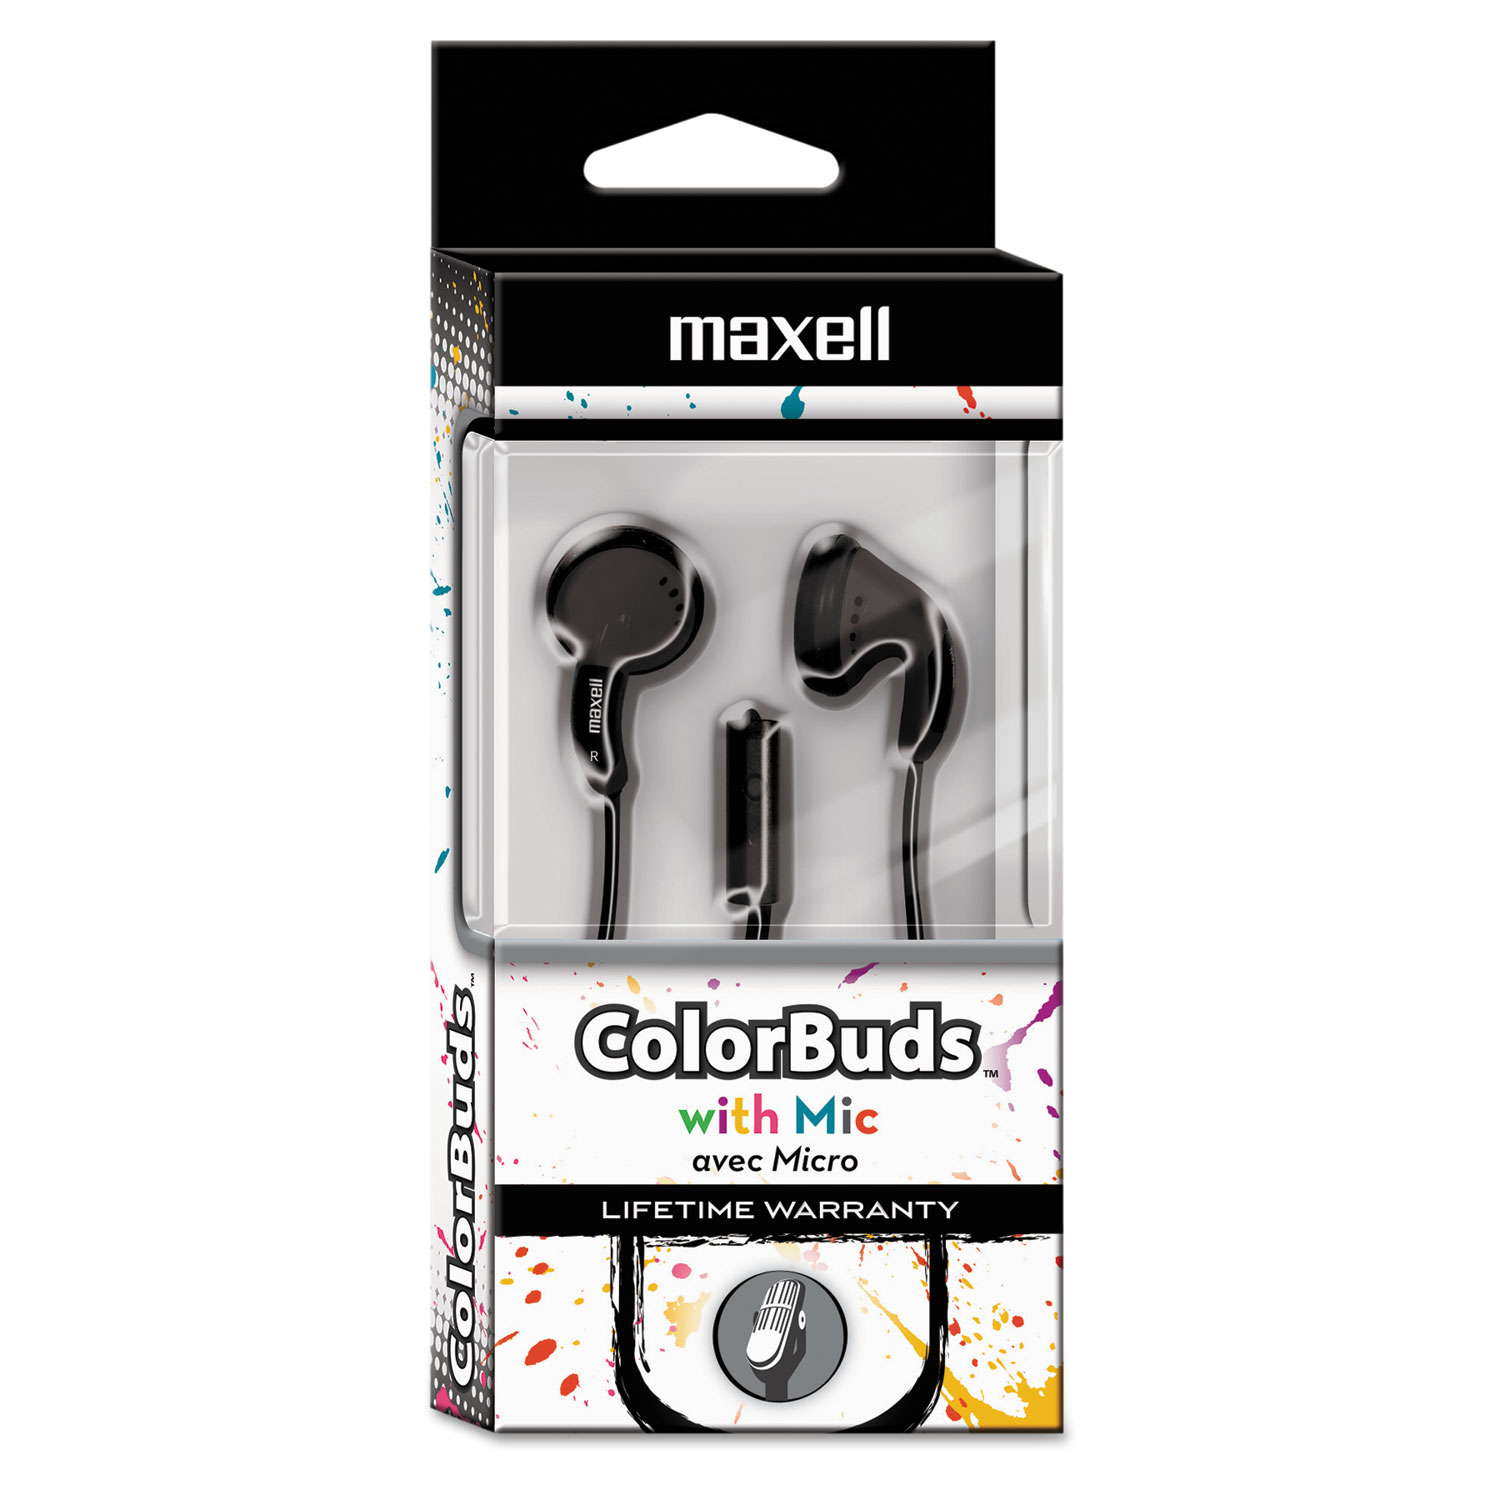  Maxell 199708 Colorbuds with Microphone, Black (MAX199708) 